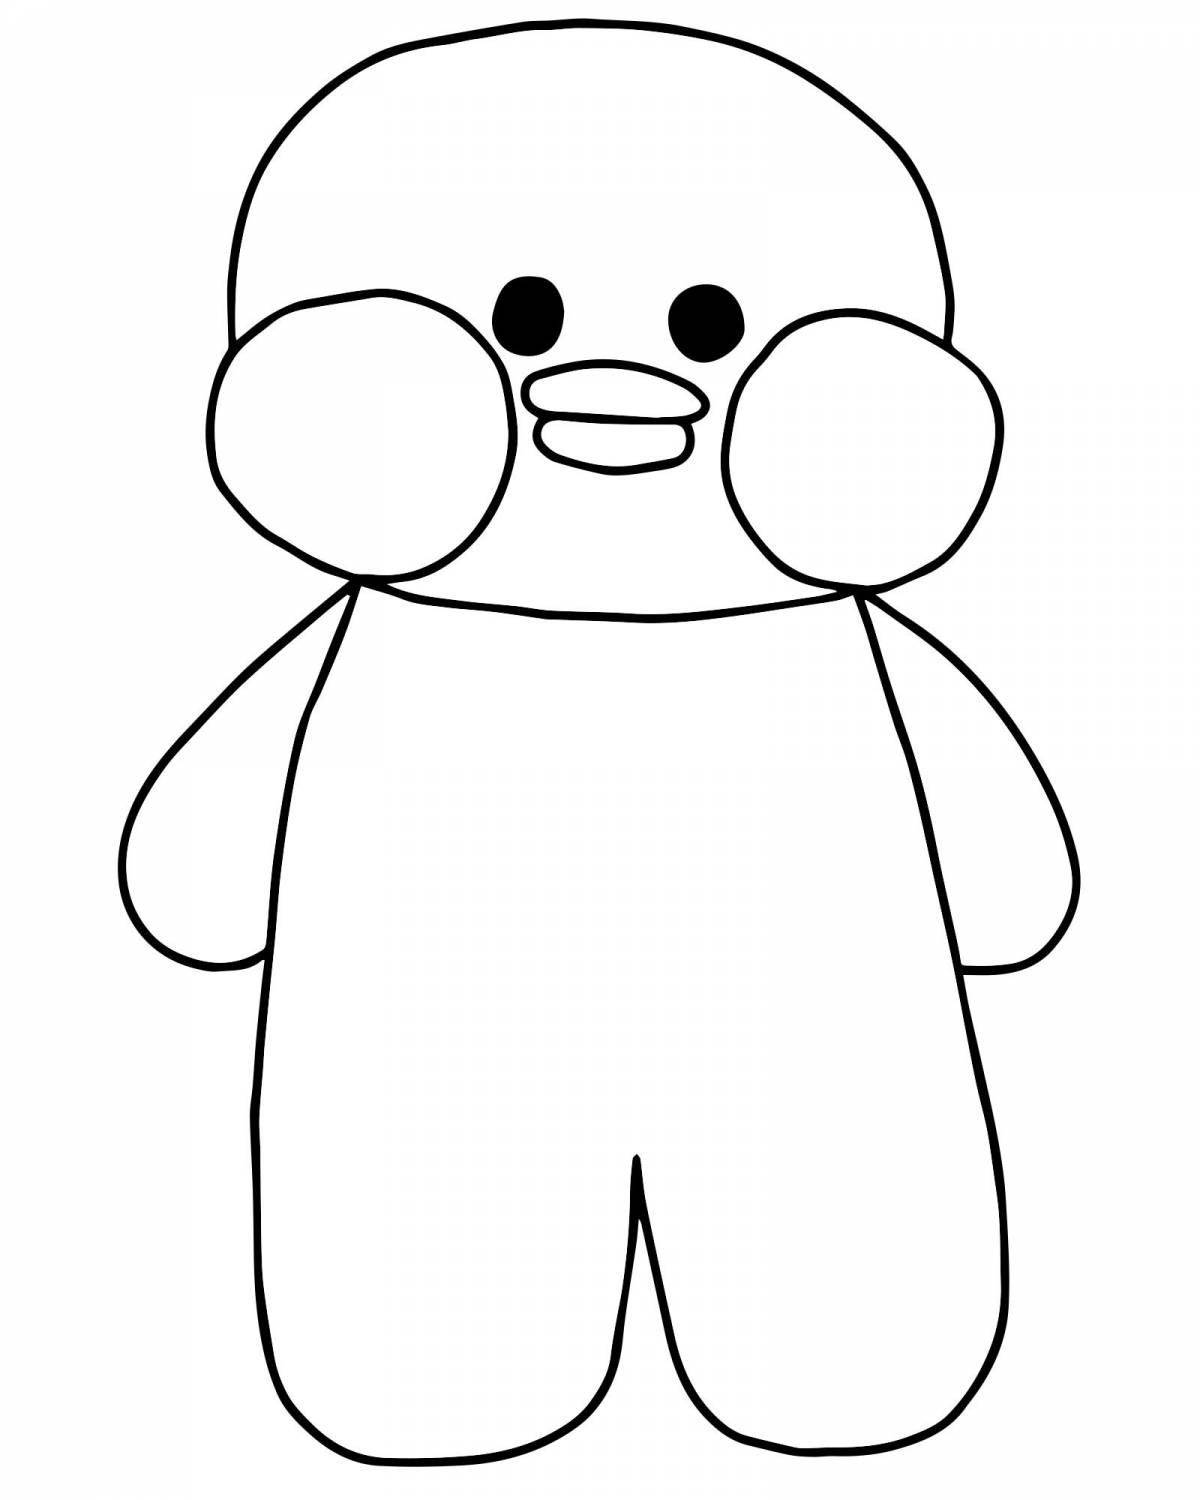 Lalafan duck shining coloring page